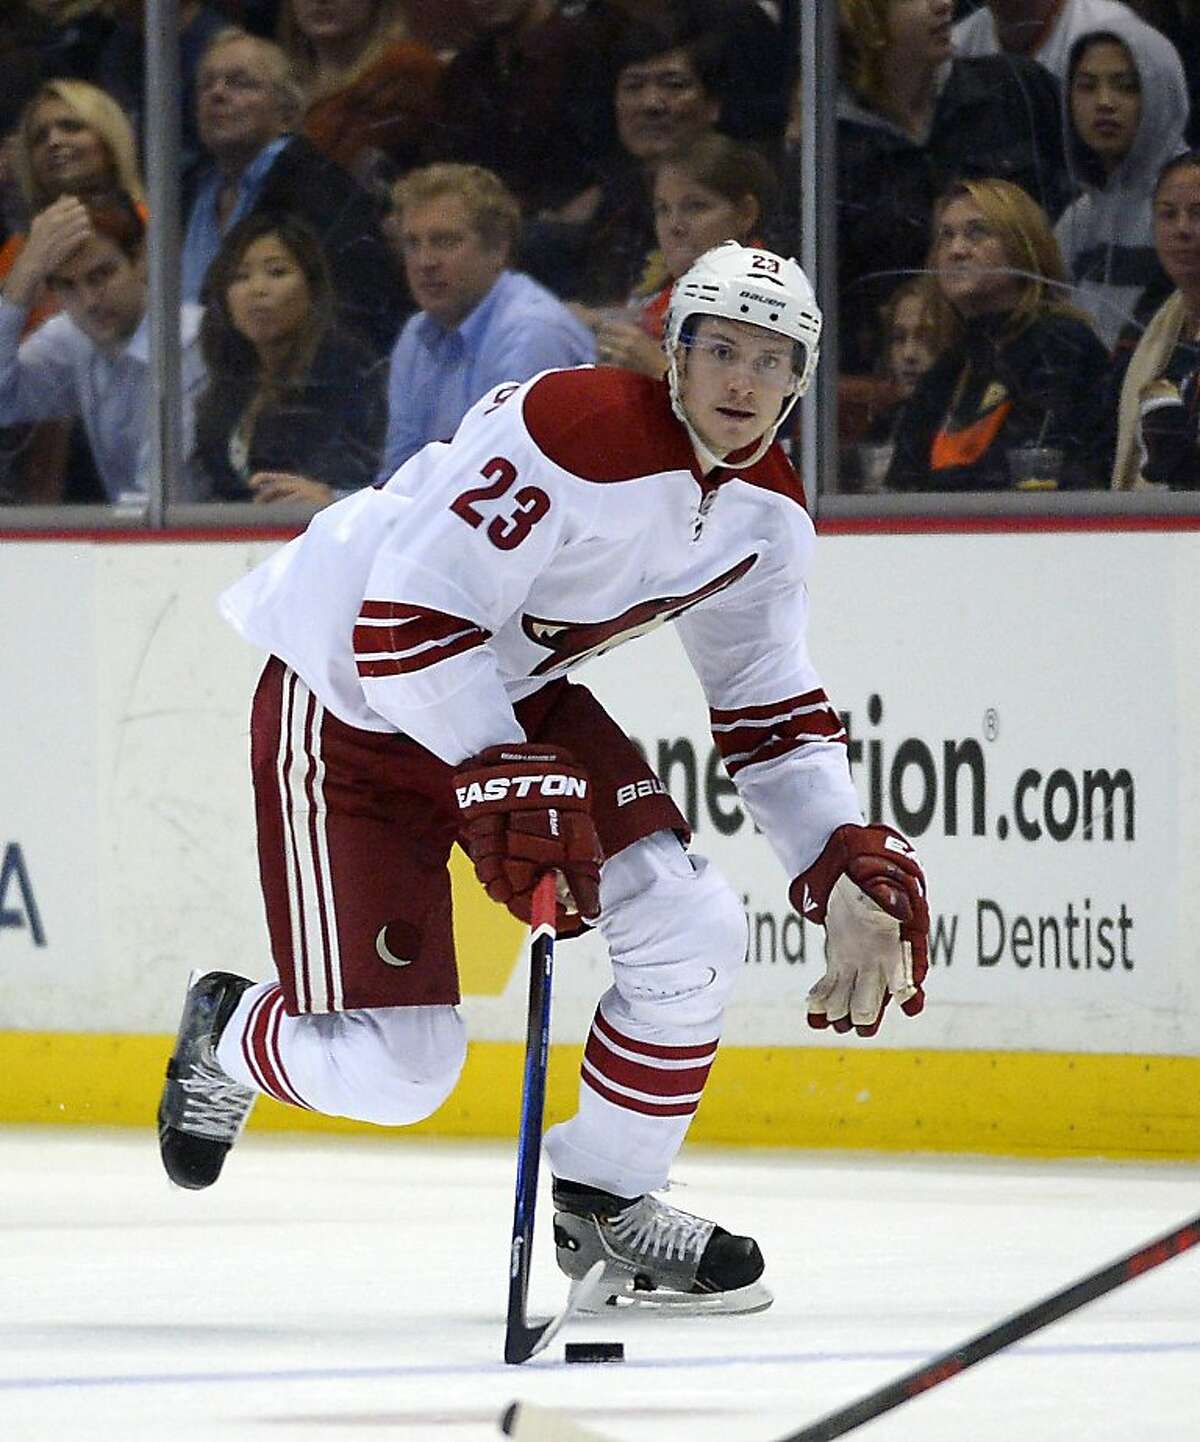 Phoenix Coyotes defenseman Oliver Ekman-Larsson, of Sweden, moves the puck during the third period of an NHL hockey game against the Anaheim Ducks, Wednesday, Nov. 6, 2013, in Anaheim, Calif. (AP Photo/Mark J. Terrill)